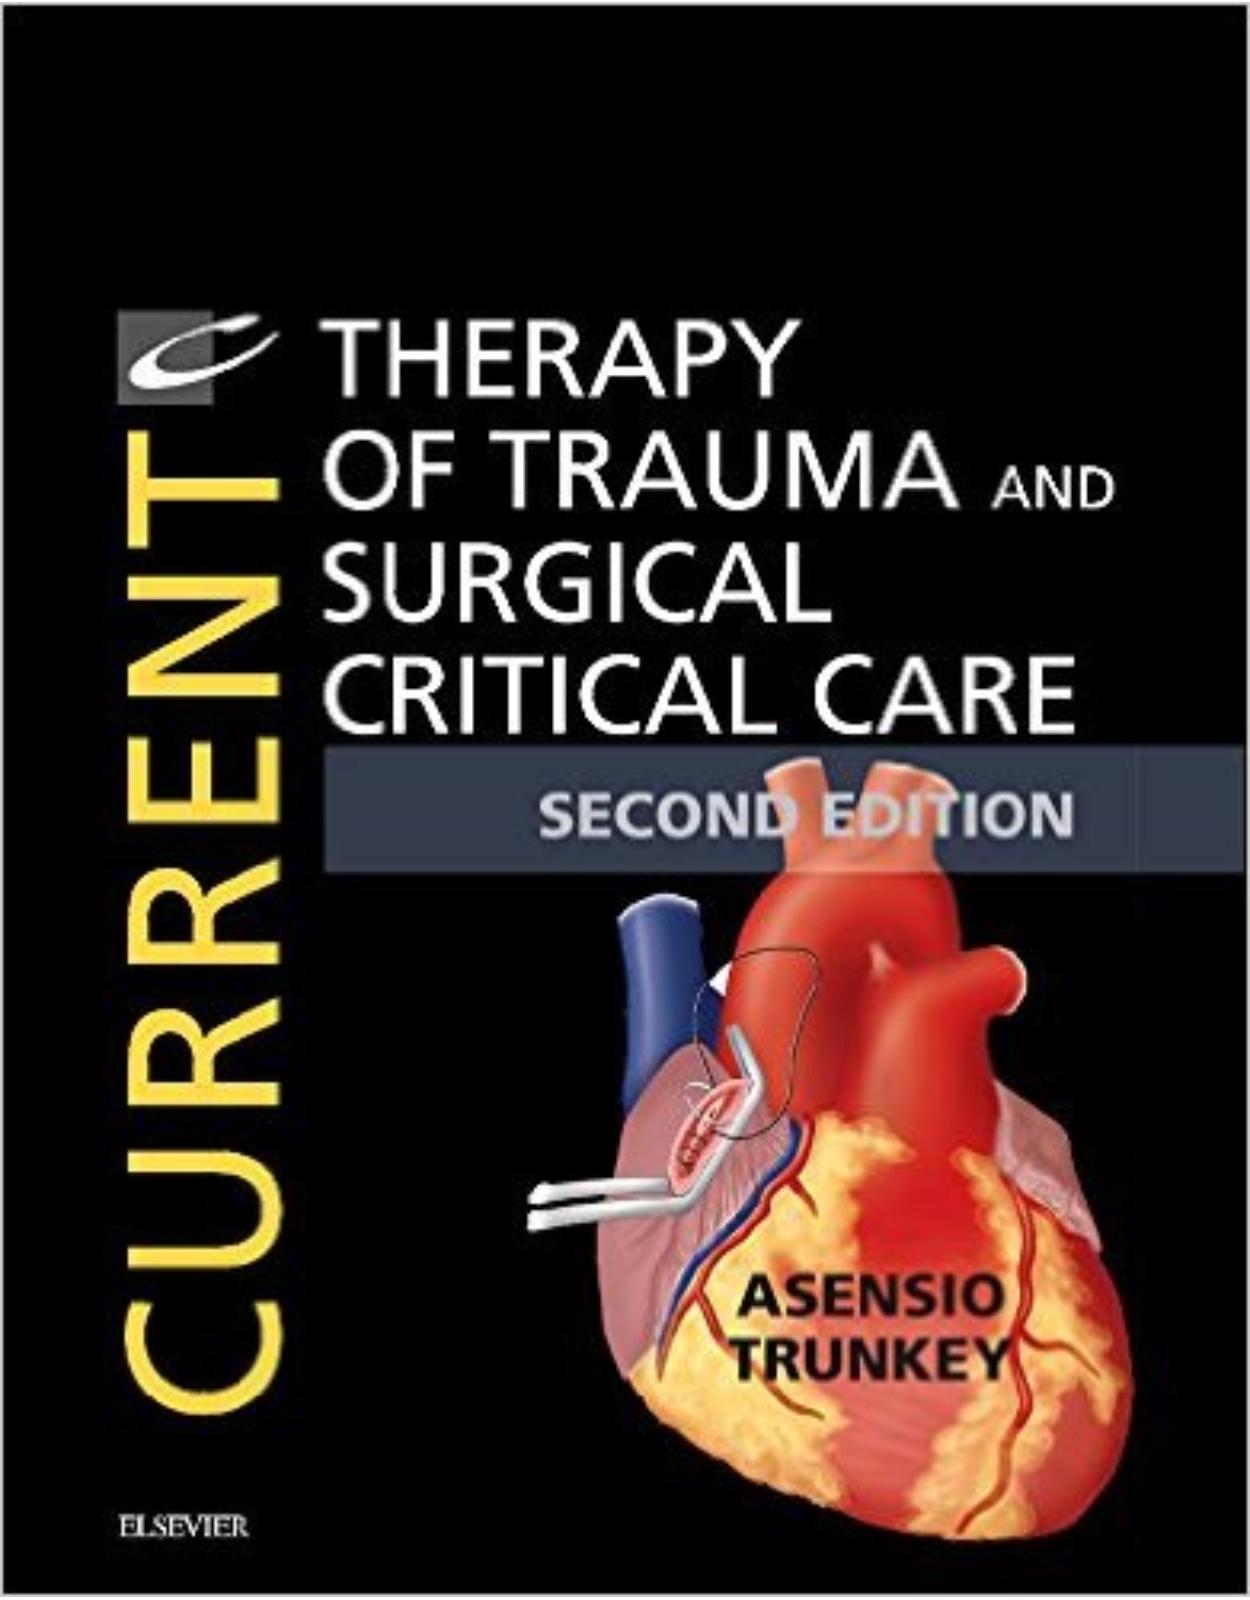 Current Therapy of Trauma and Surgical Critical Care, 2e